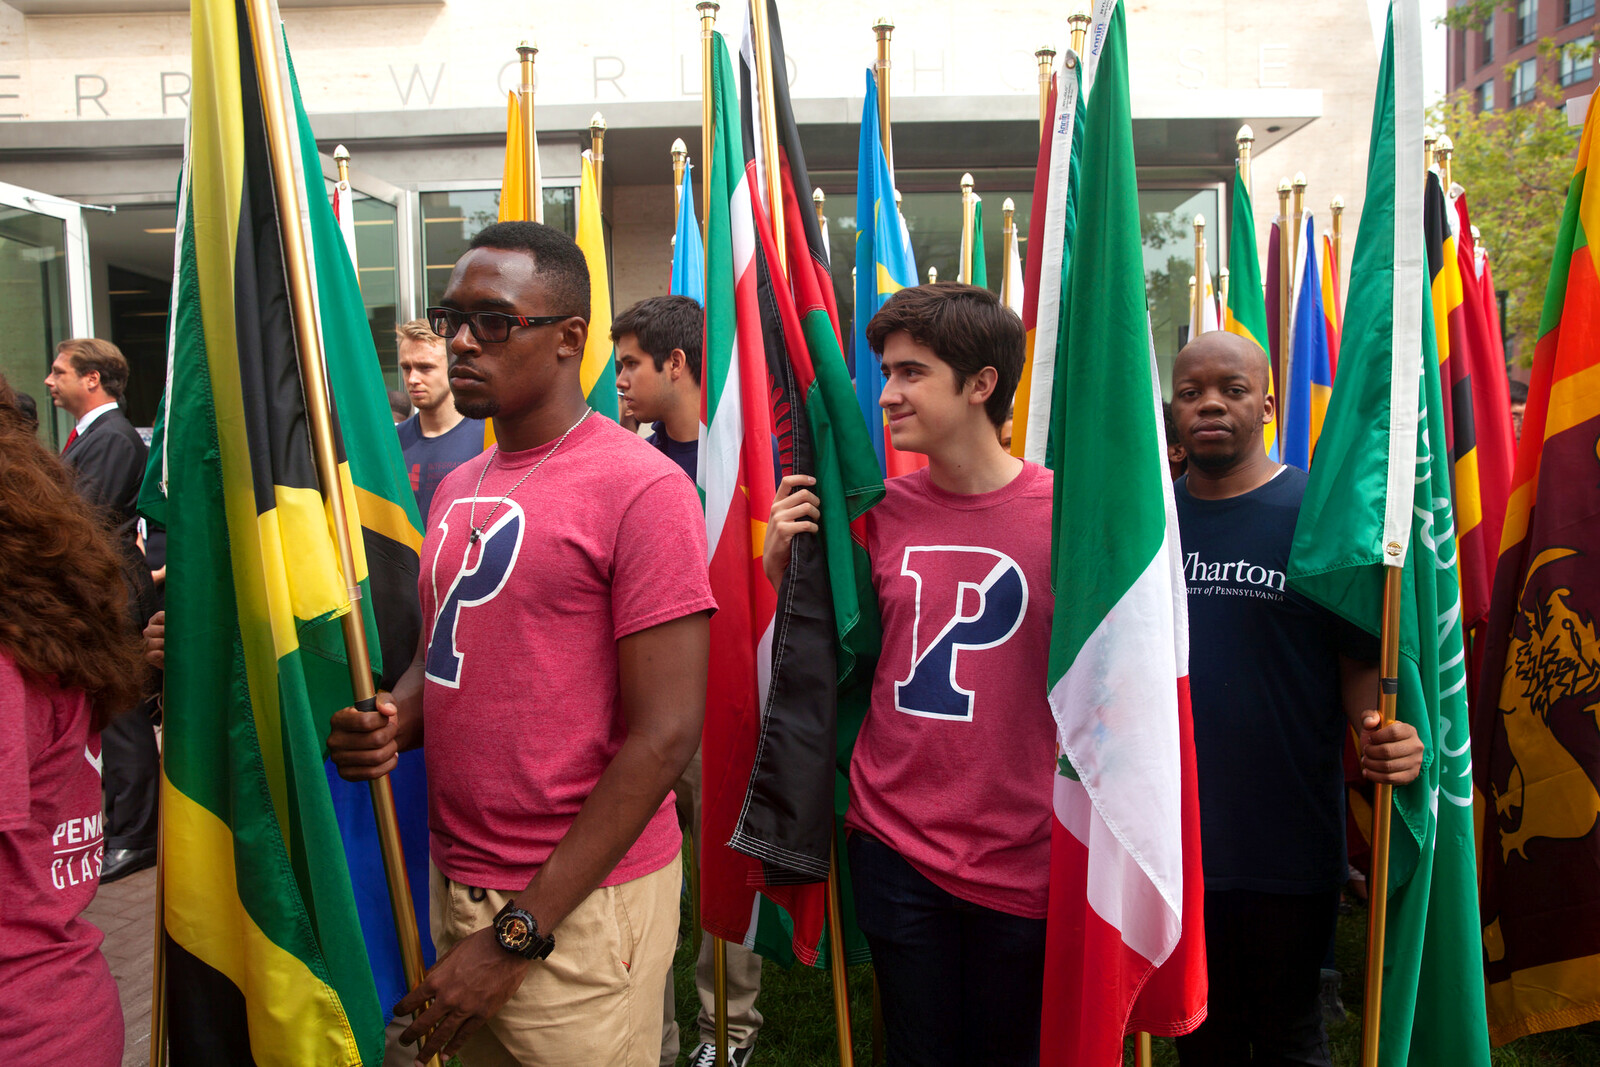 Students holding flags, standing in front of Perry World House